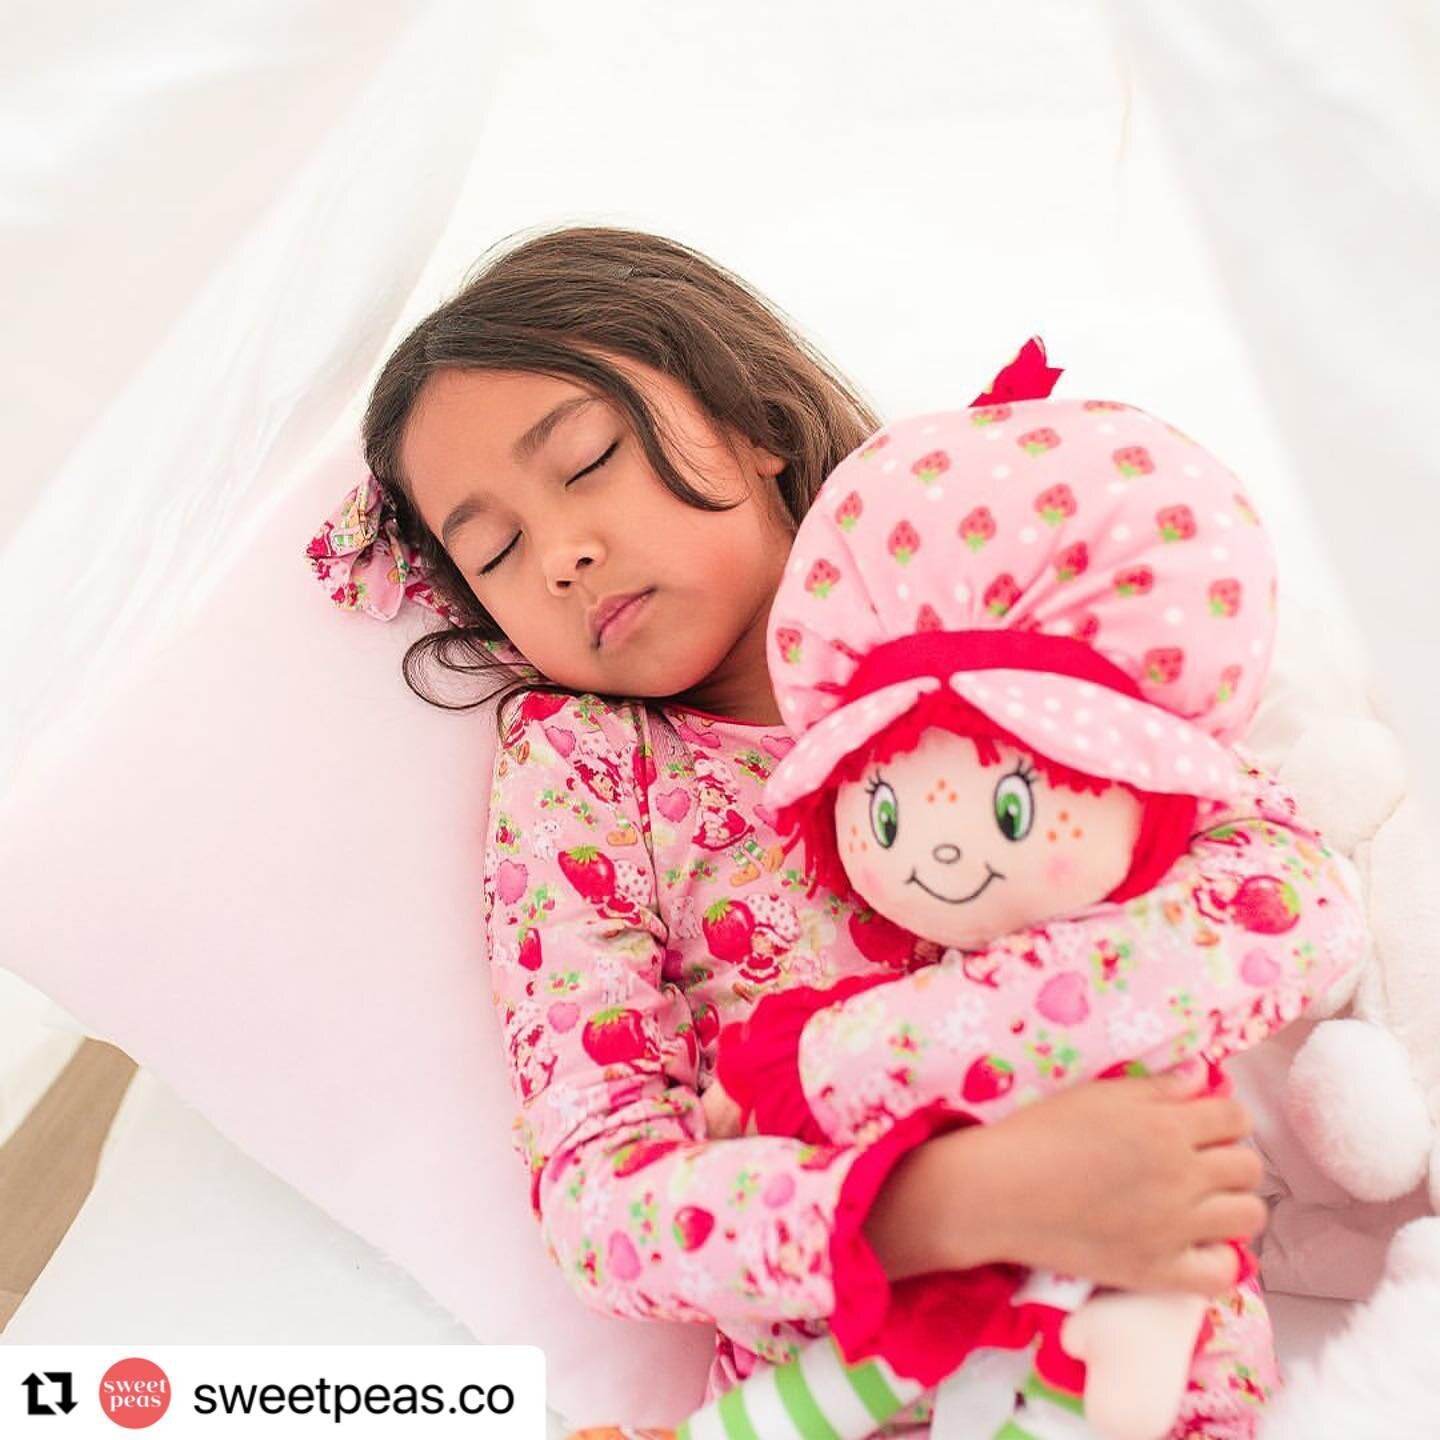 Bringing back childhood memories with our nostalgic Strawberry Shortcake Pillow Buddy! 🍓✨ Available now on Amazon, this cuddly companion takes us back to simpler times filled with berry special adventures and cozy bedtime stories.

Check out @sweetp